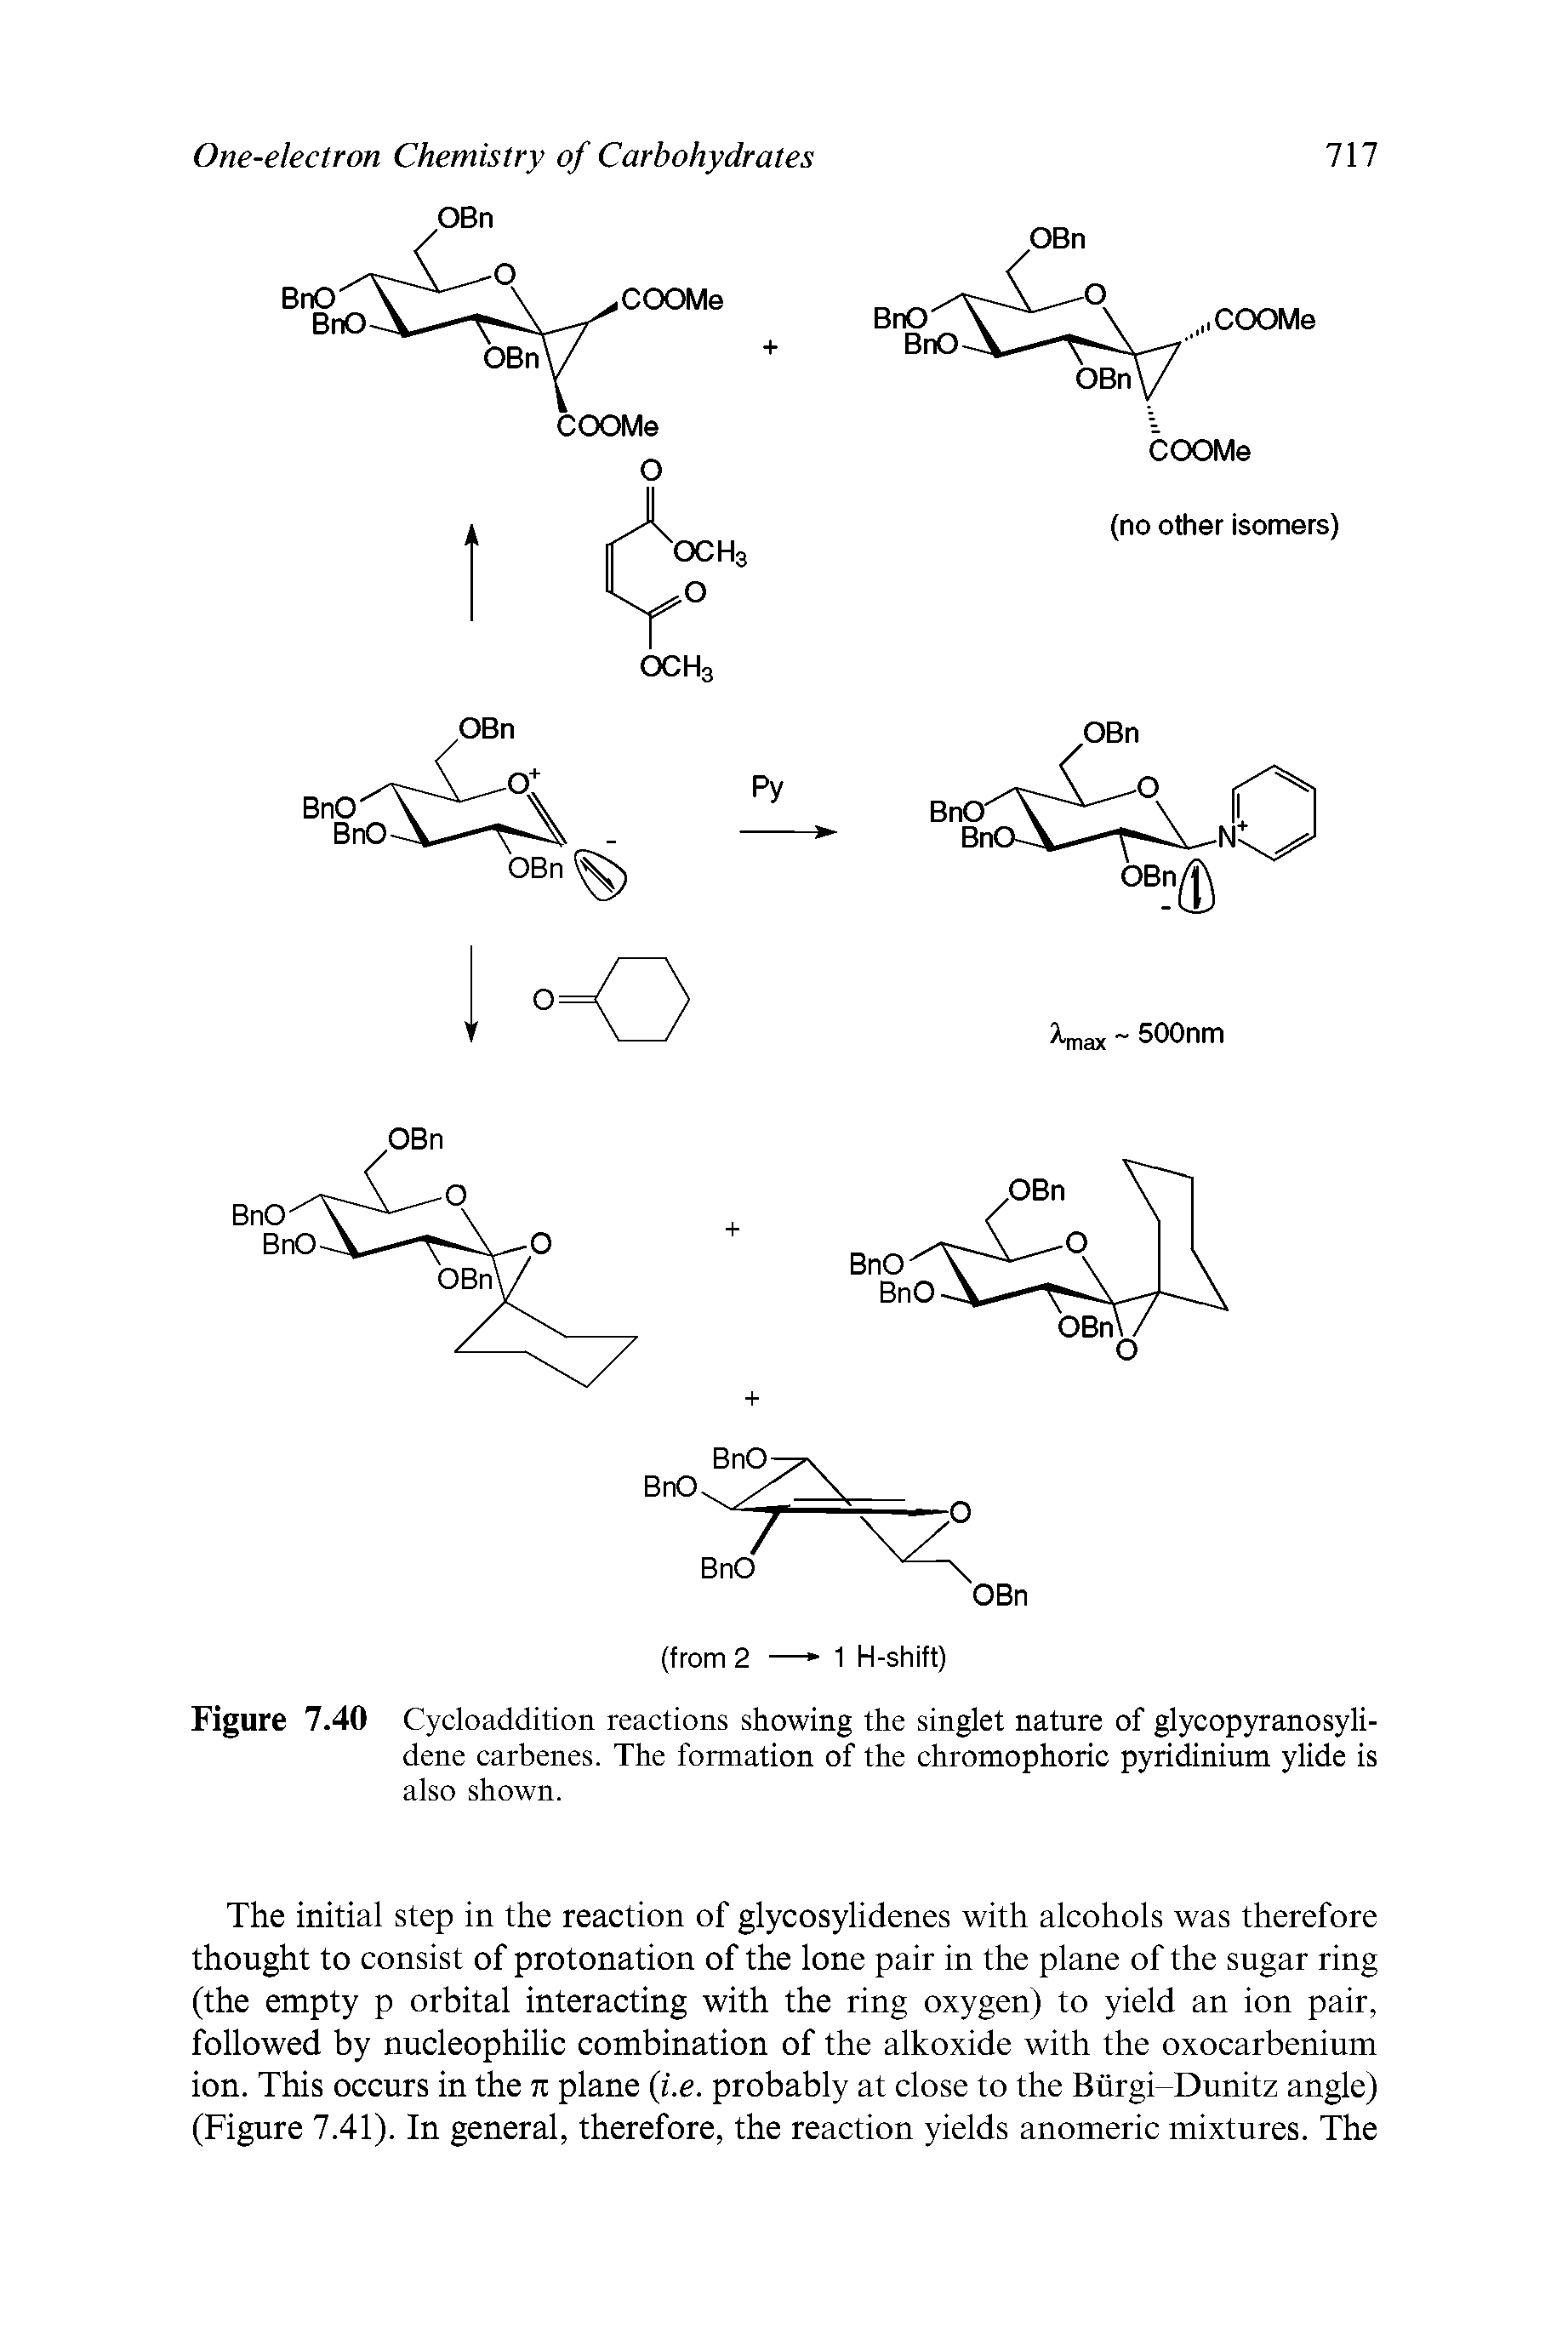 Figure 7.40 Cycloaddition reactions showing the singlet nature of glycopyranosyli-dene carbenes. The formation of the chromophoric pyridinium ylide is also shown.